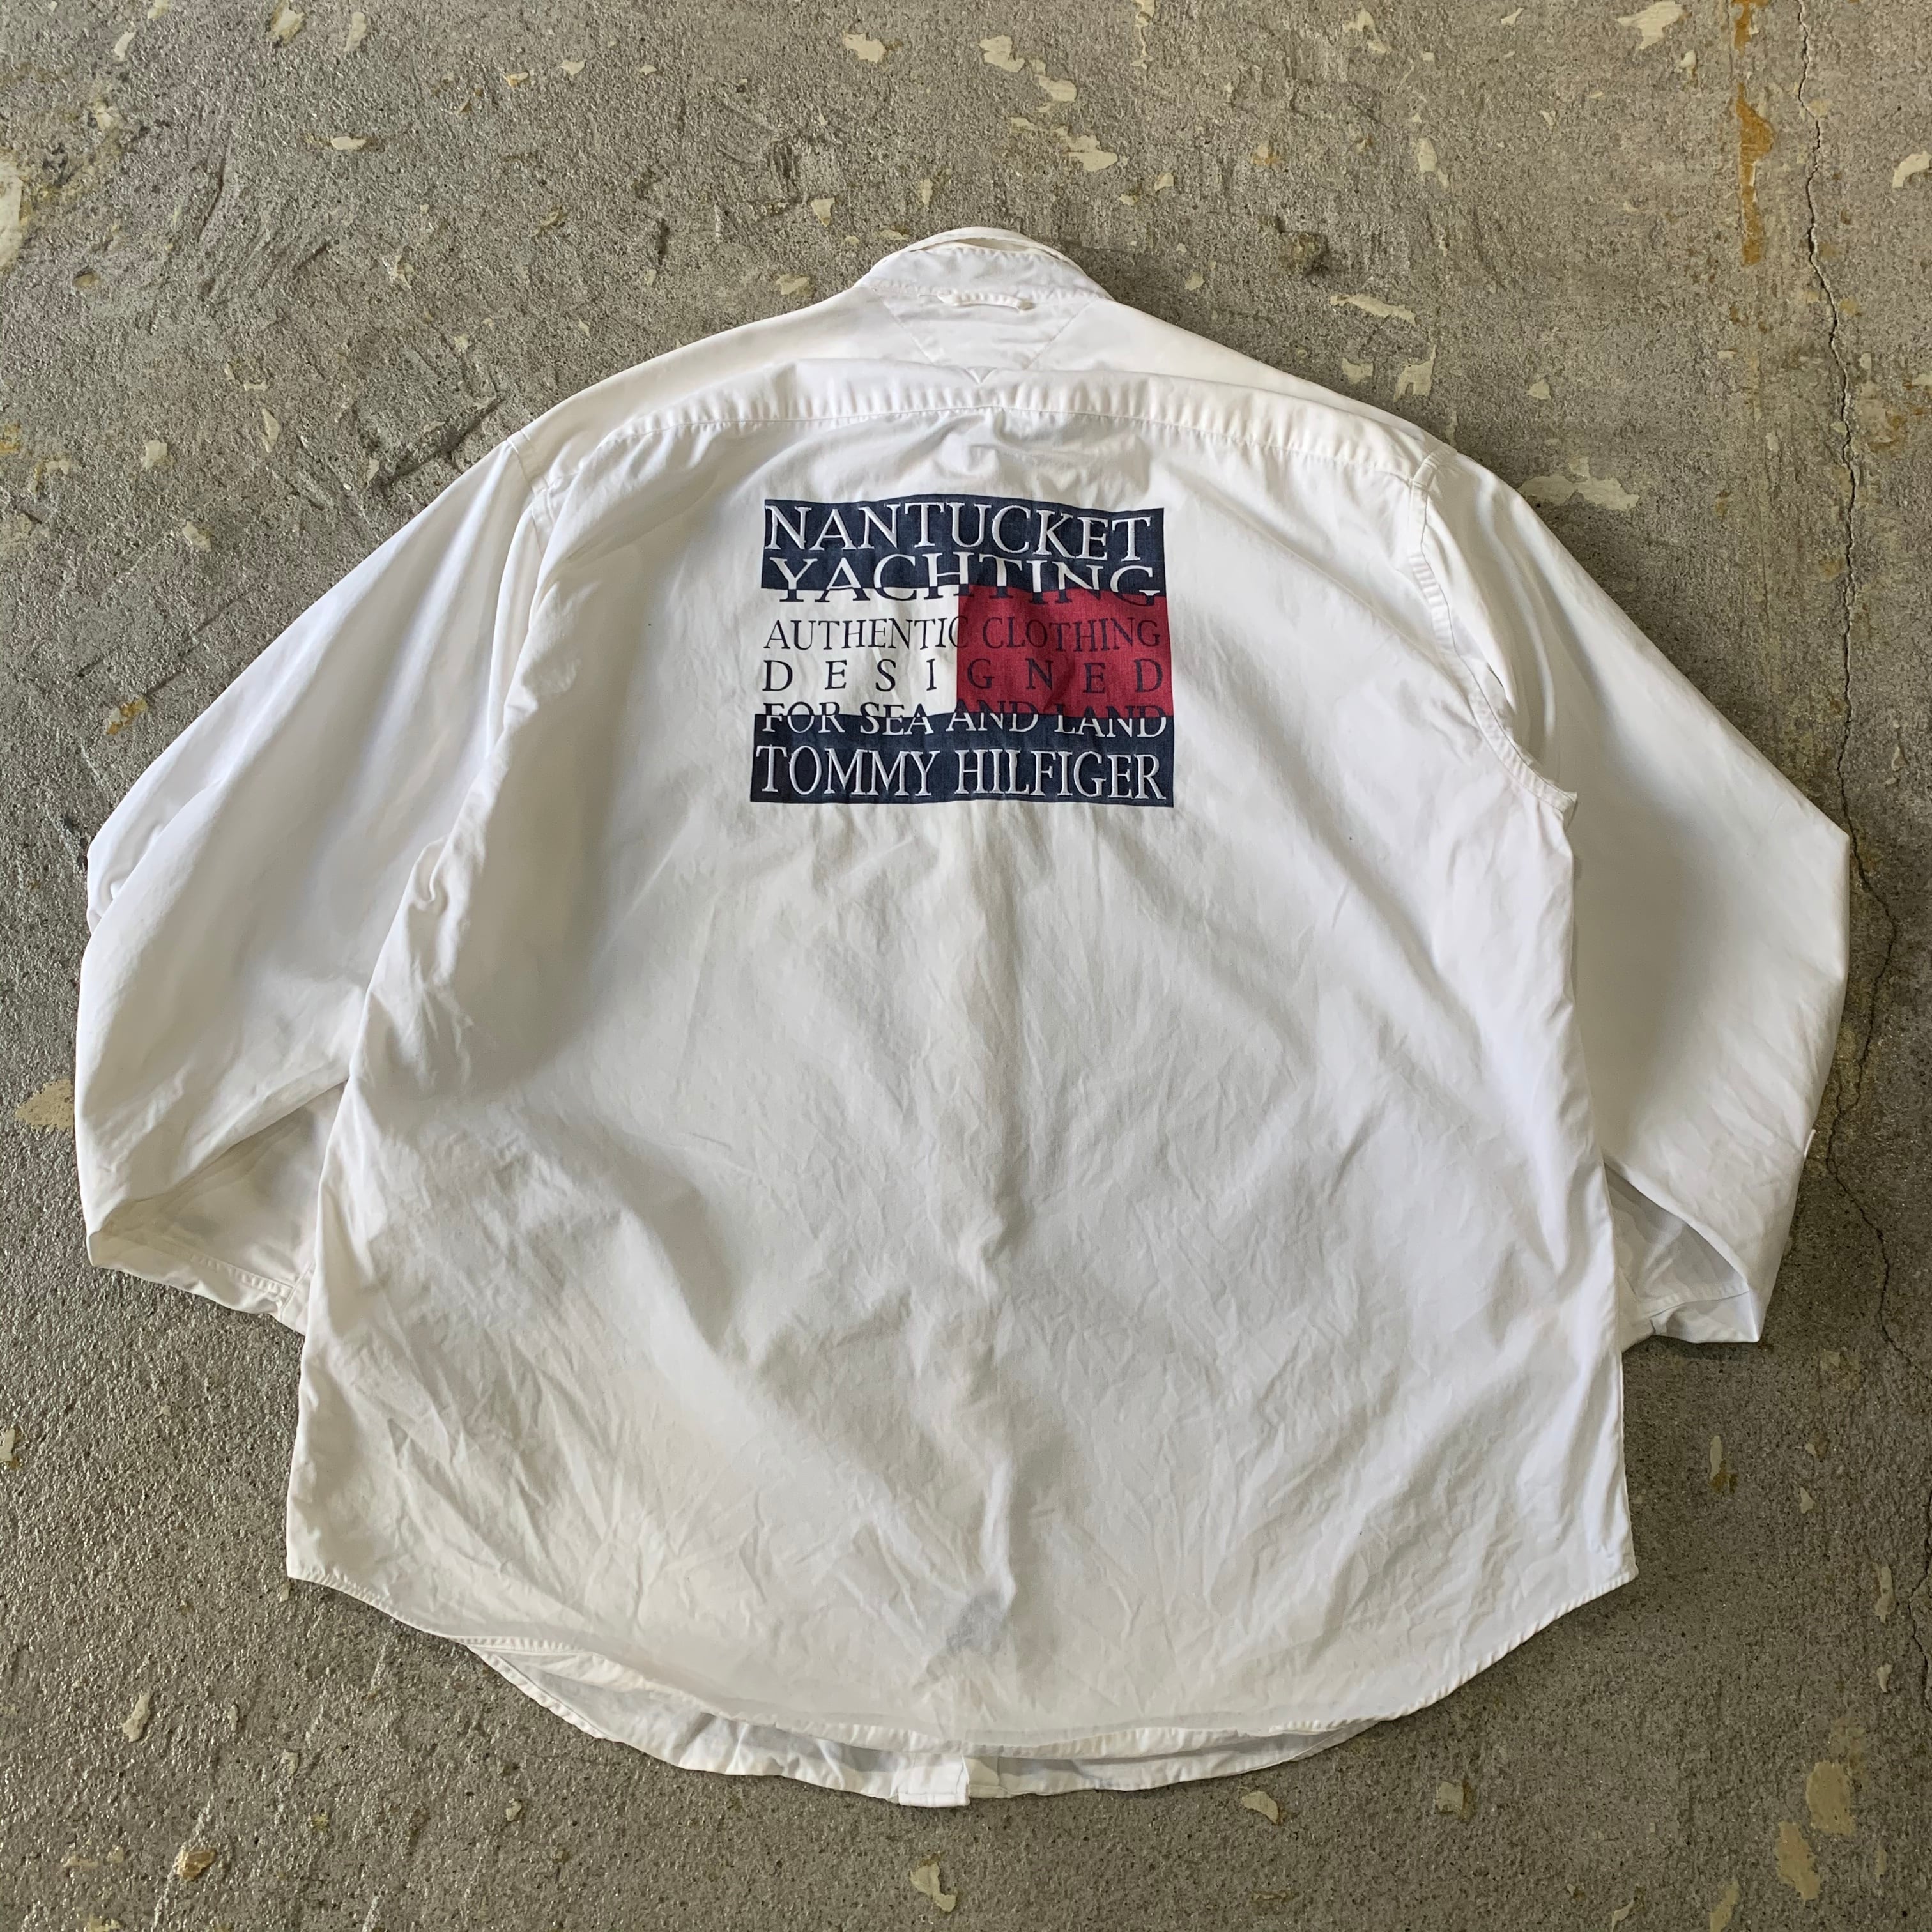 90s Tommy Hilfiger flag shirt | What'z up